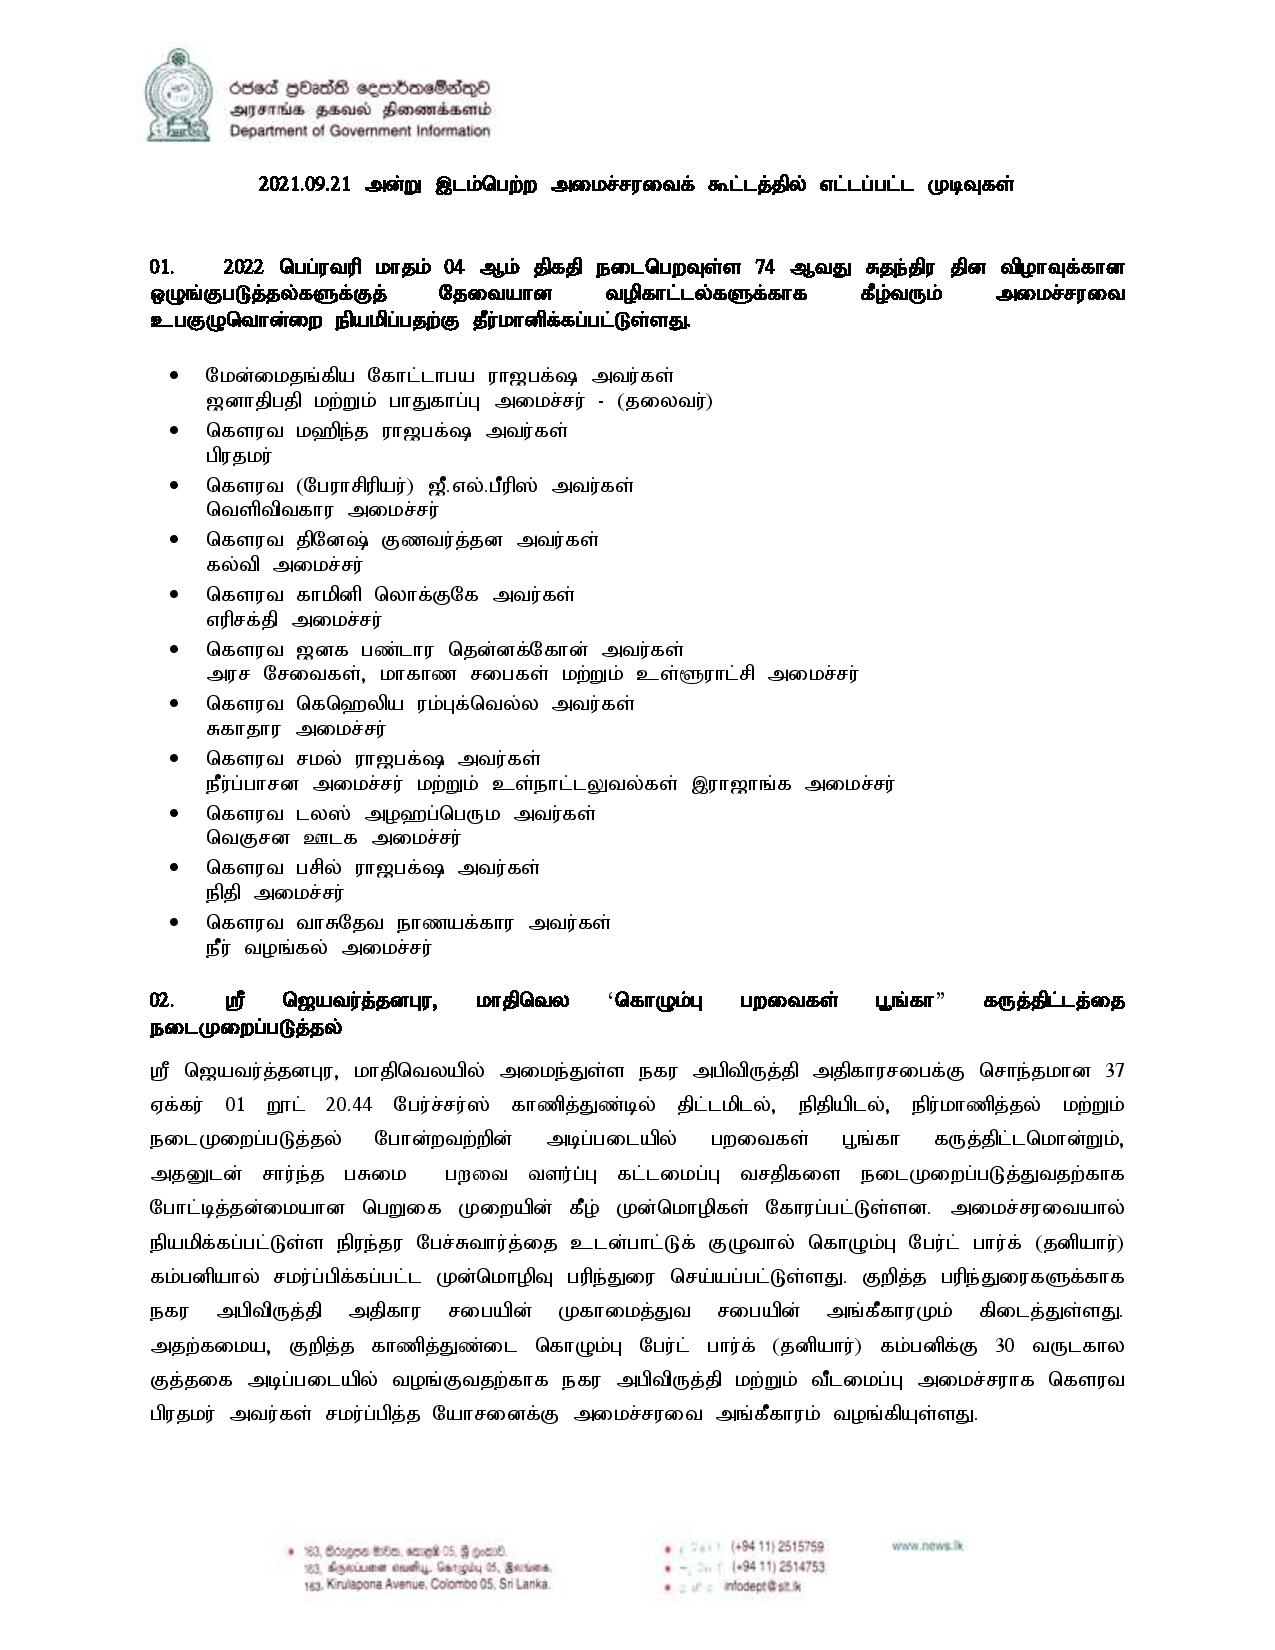 Cabinet Decisions on 21.09.2021 Tamil page 001